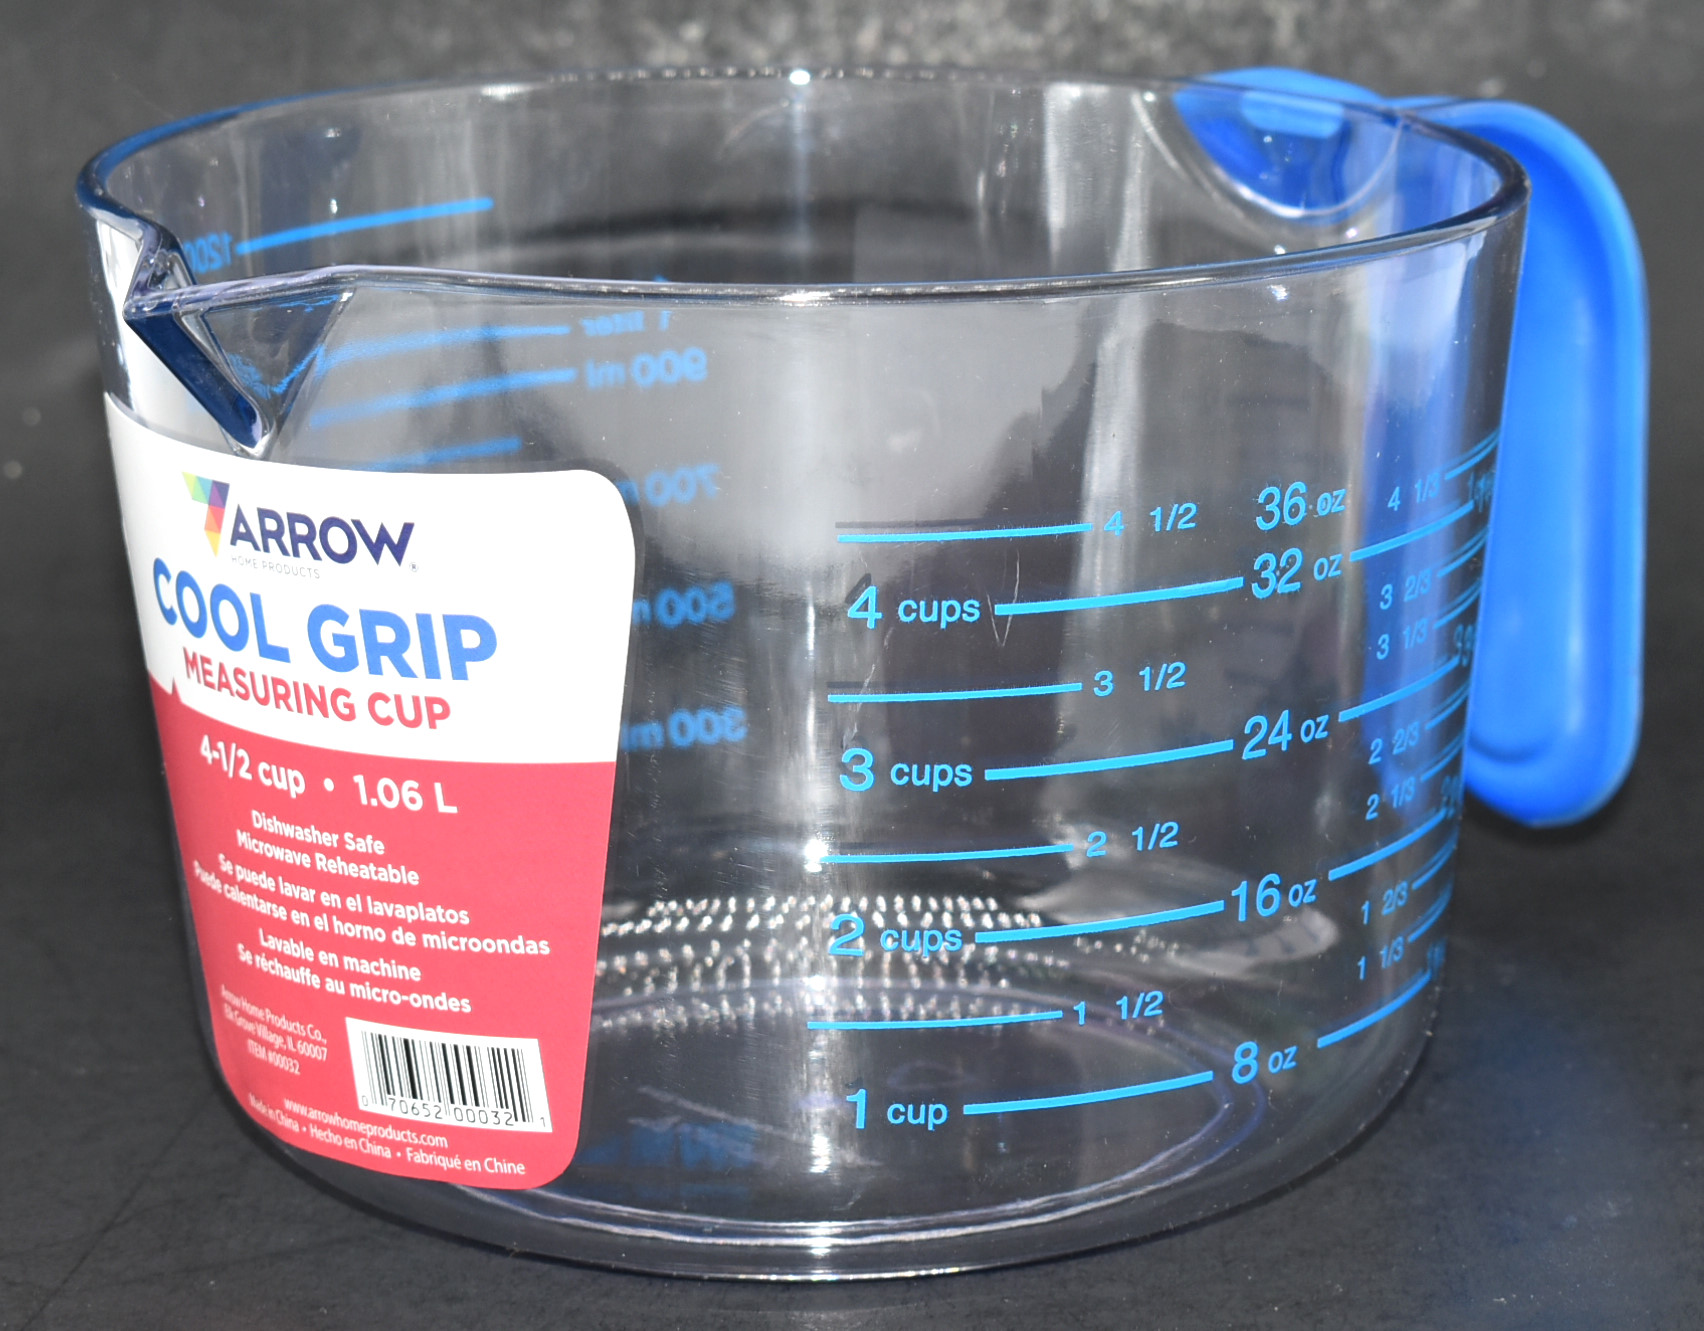 MEASURING CUP, 4.5 CUP, COOL GRIP